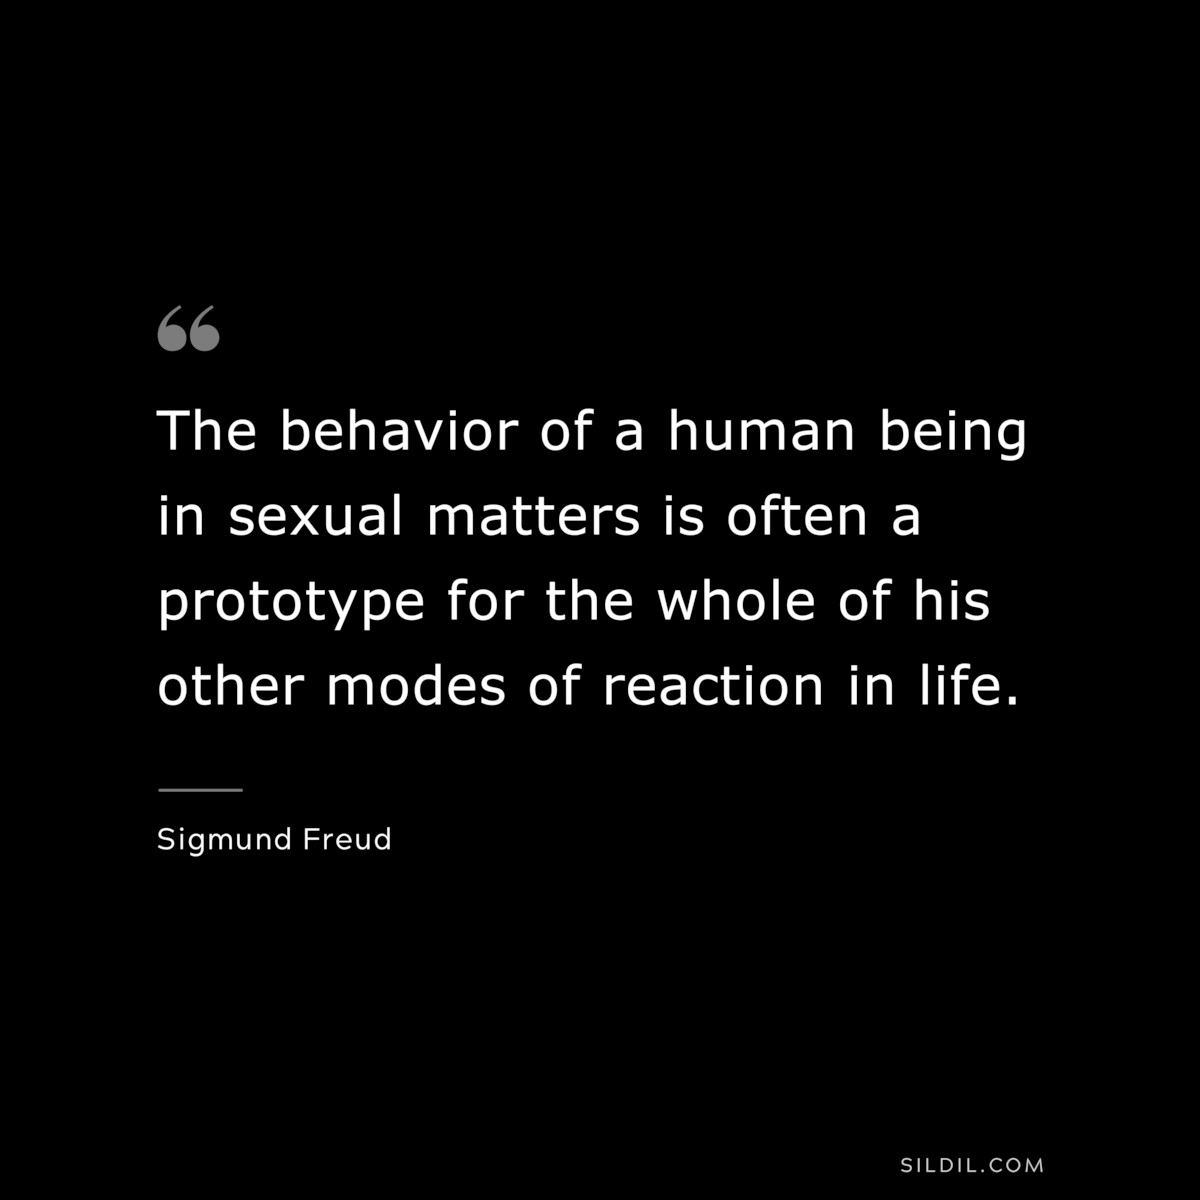 The behavior of a human being in sexual matters is often a prototype for the whole of his other modes of reaction in life. ― Sigmund Frued